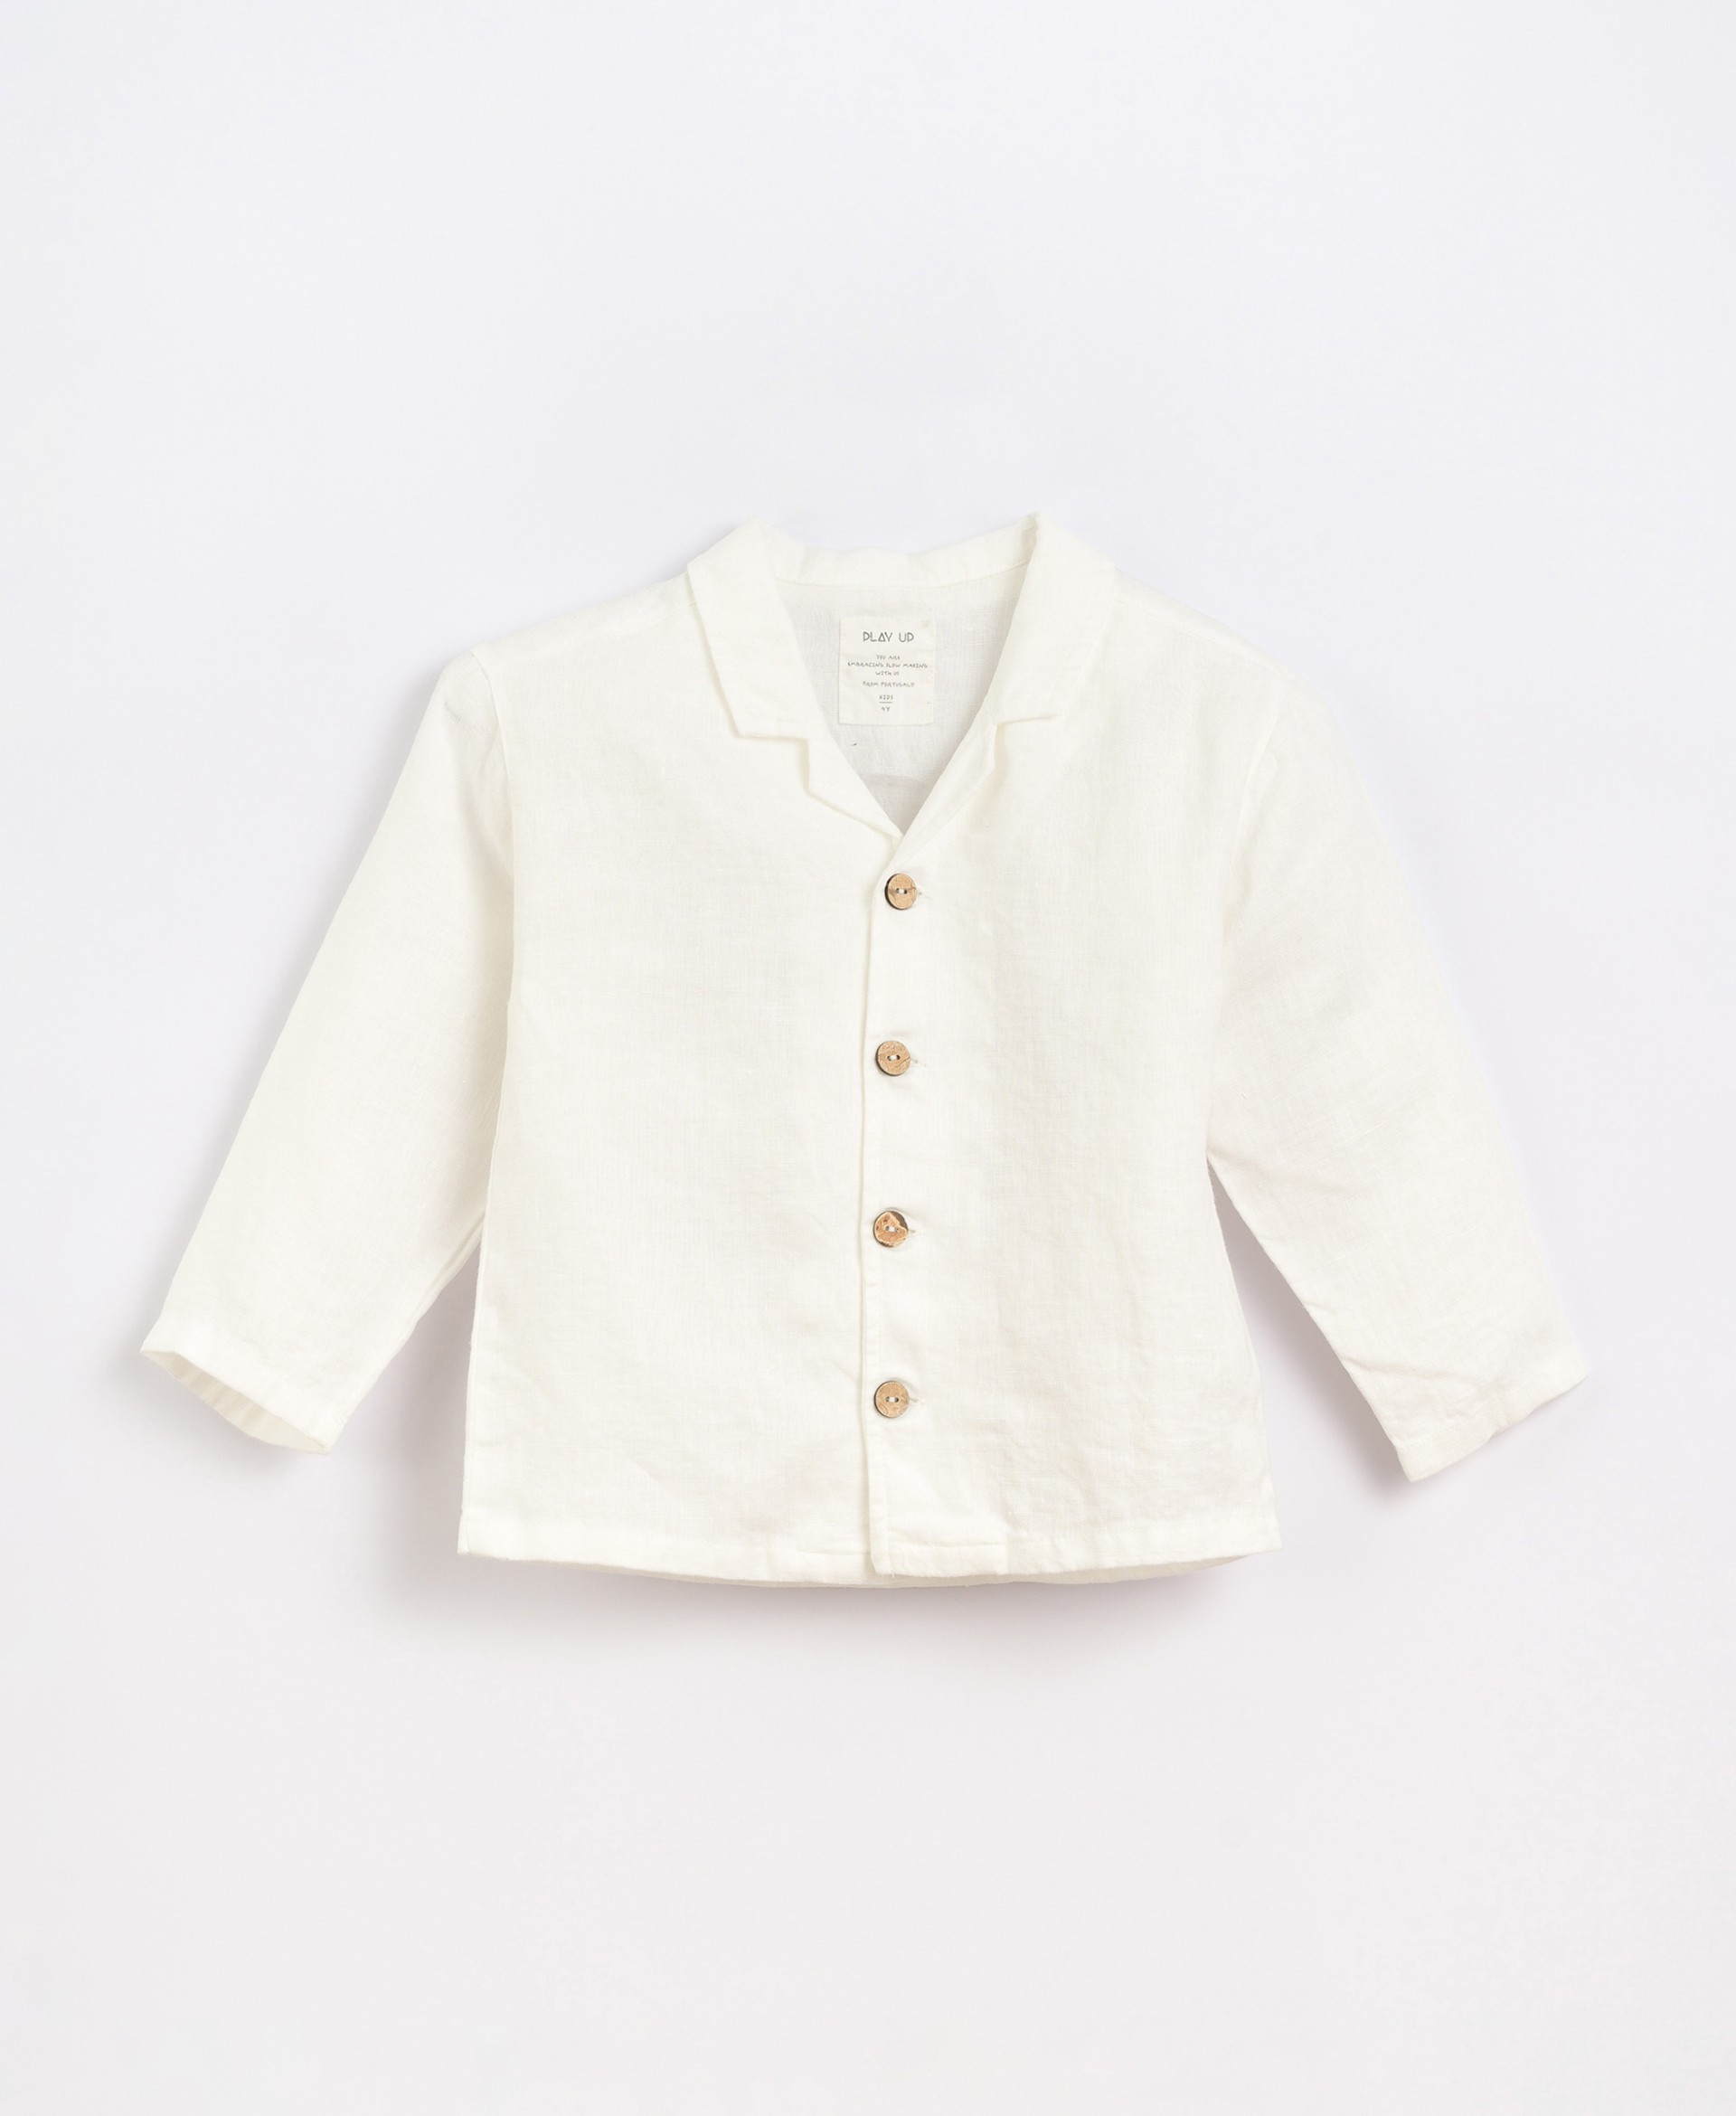 Linen shirt with long sleeves | Basketry